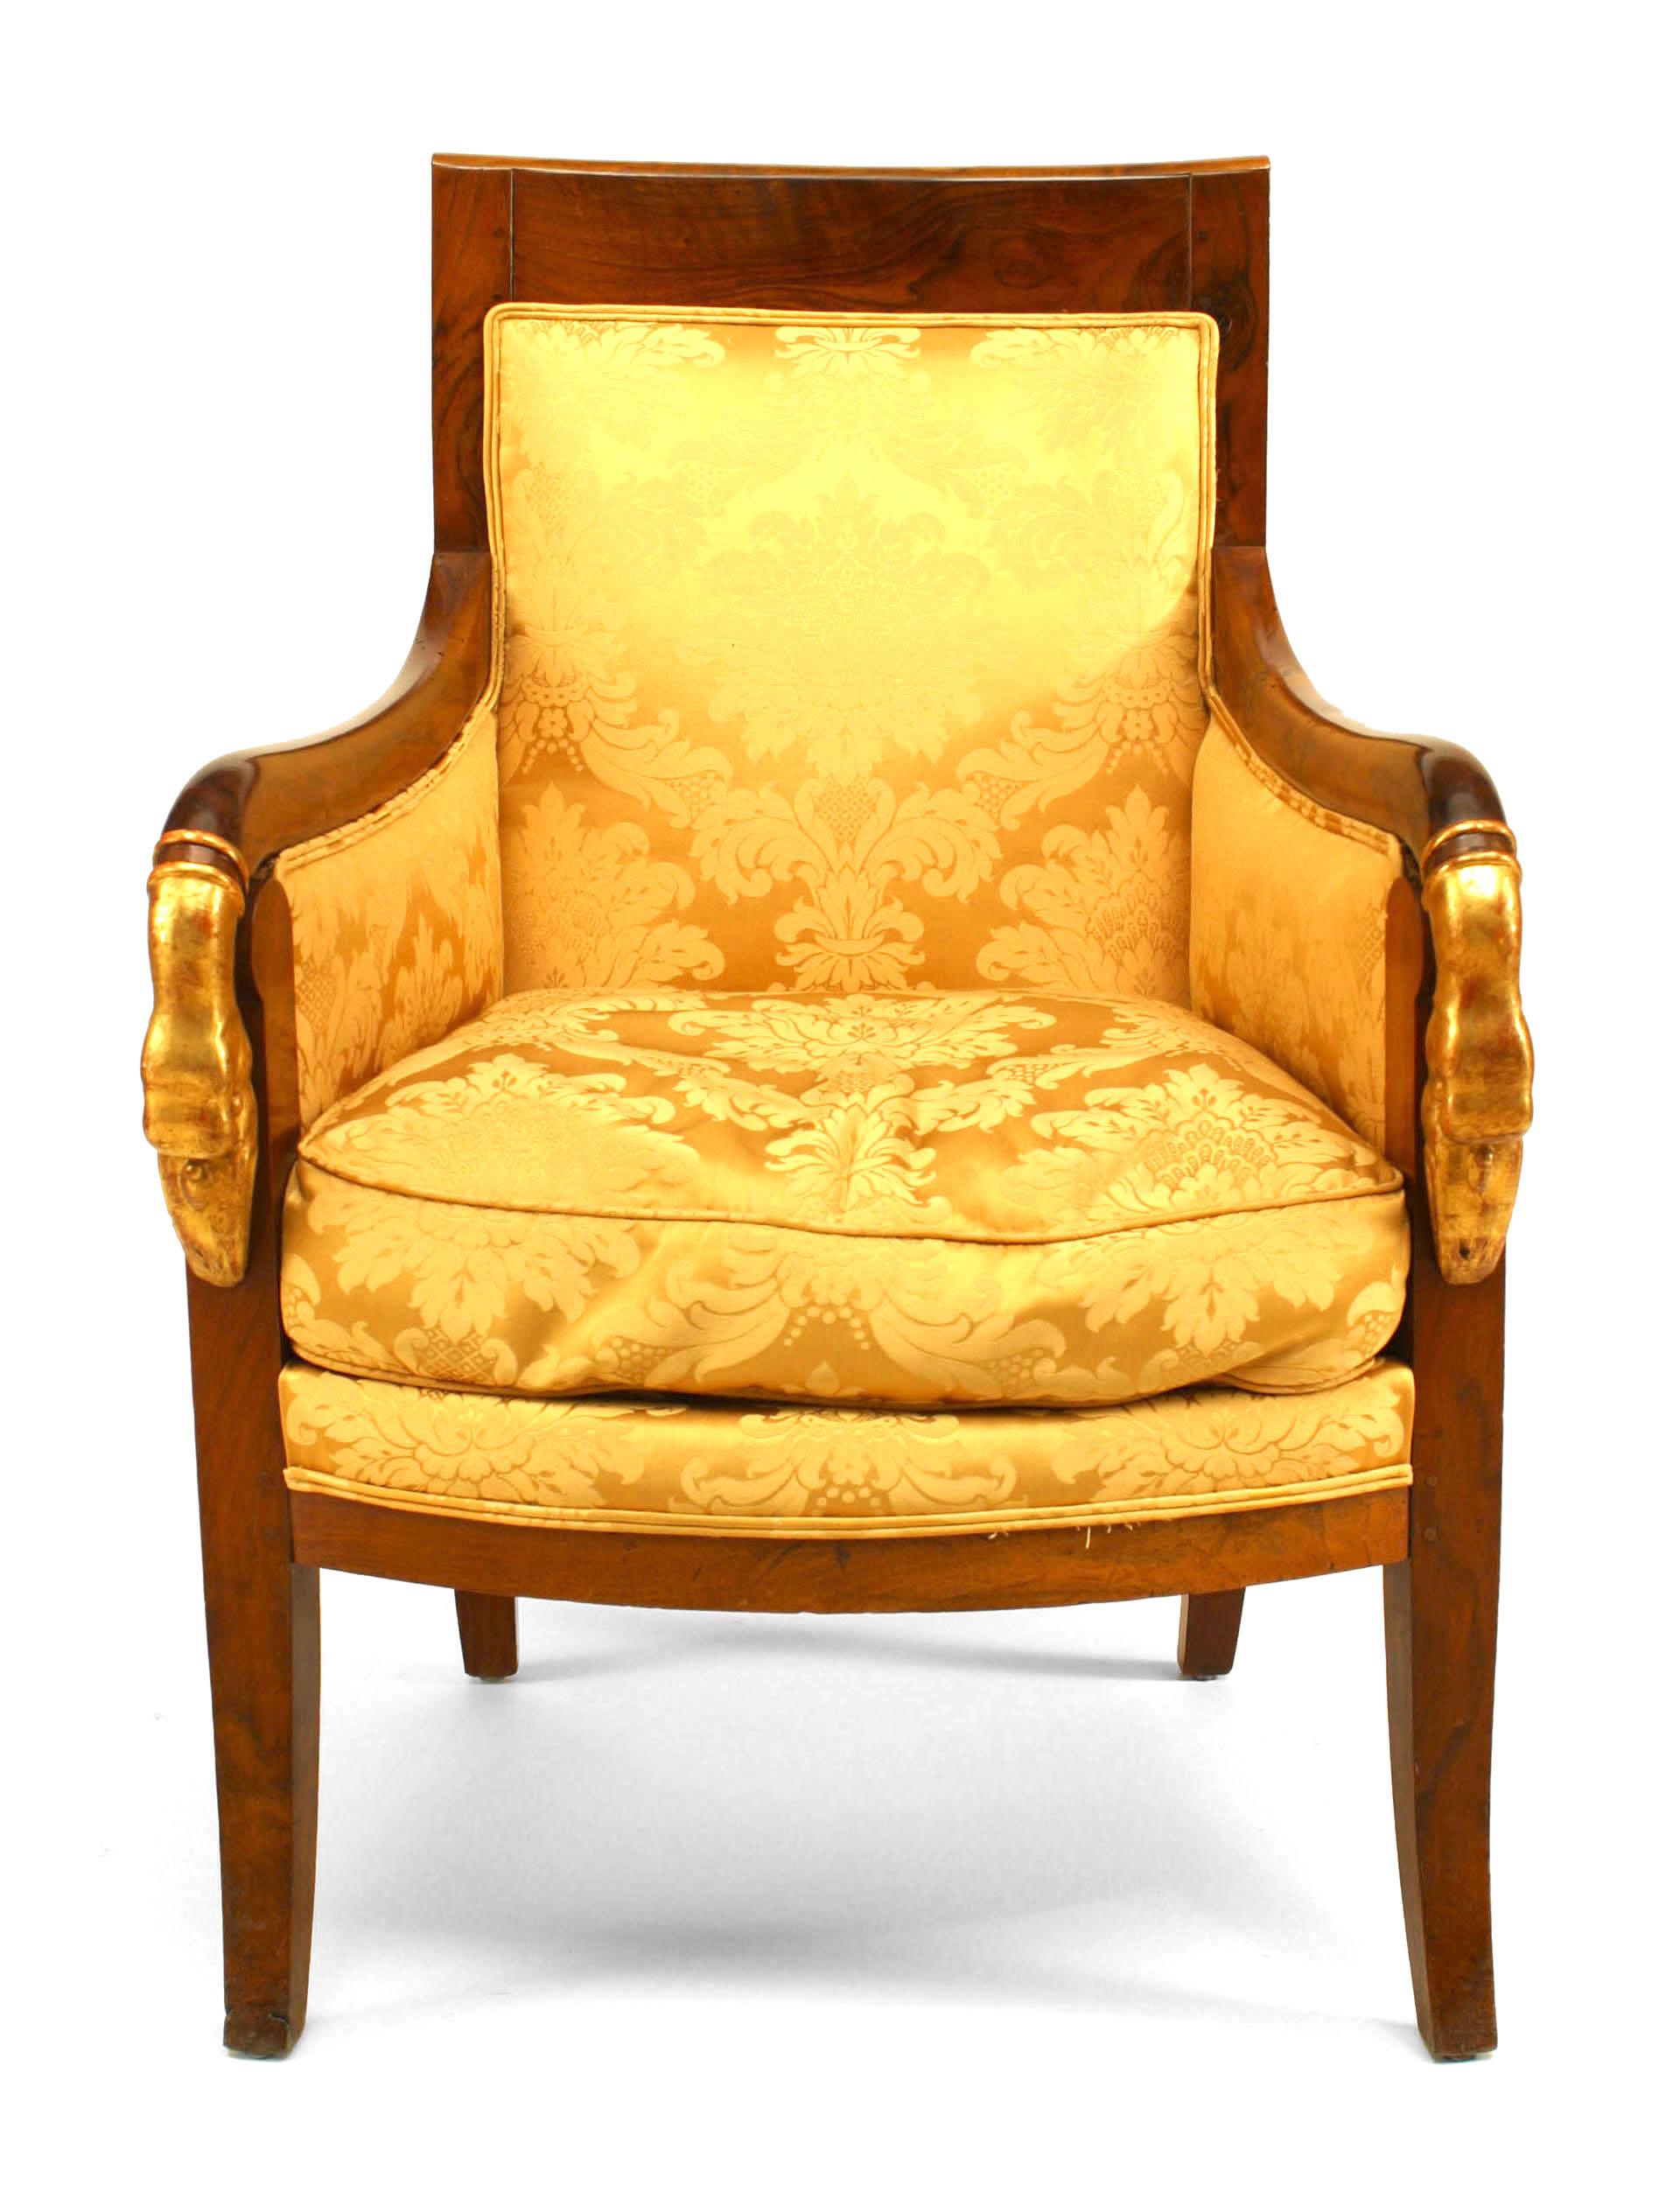 Early 19th Century French Empire Gold Upholstered 5-Piece Living Room Set For Sale